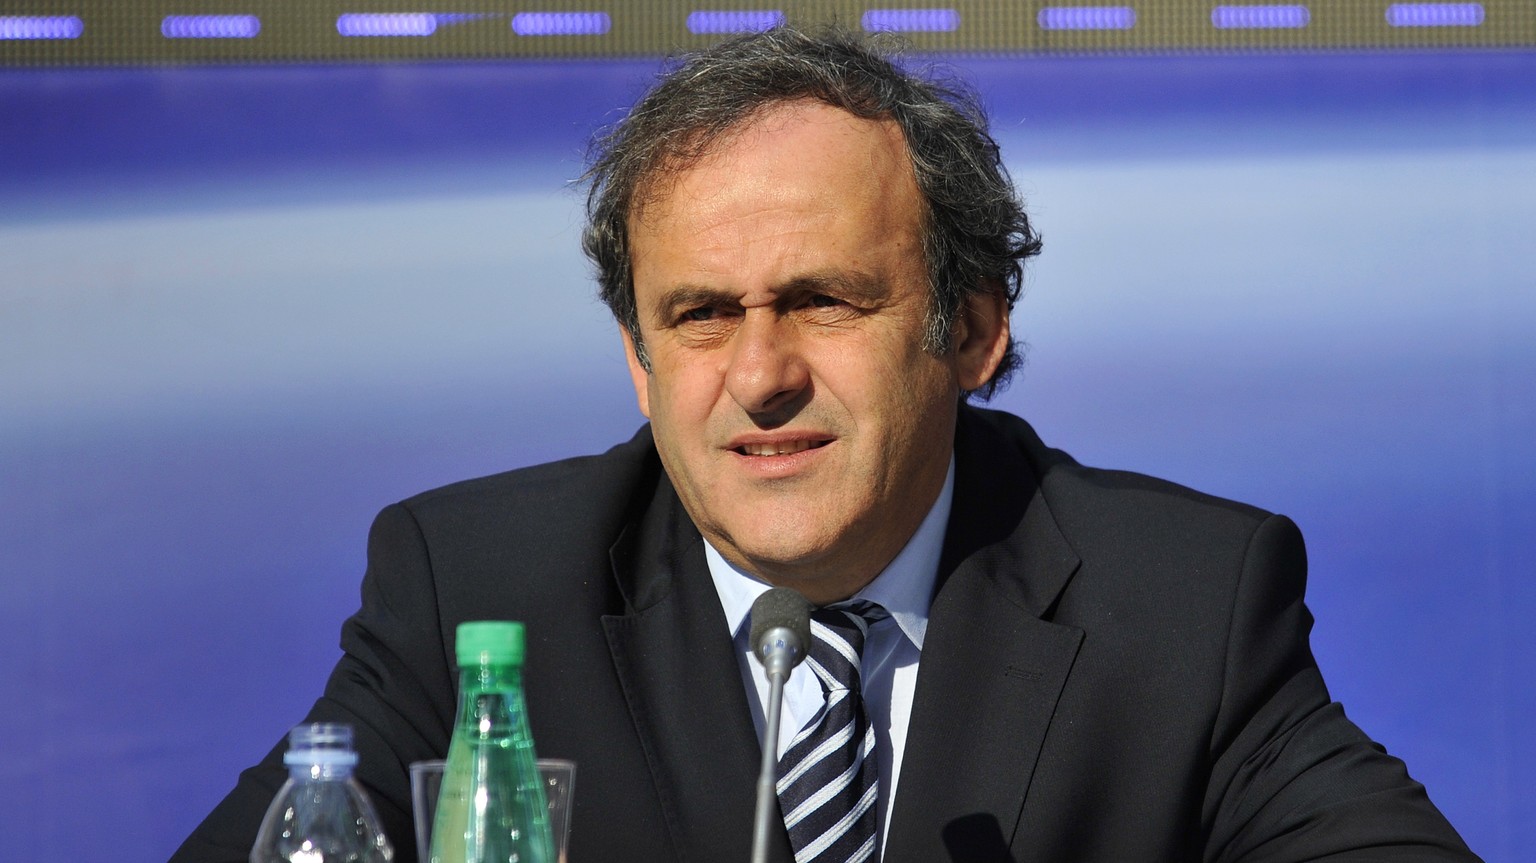 epa07655099 (FILE) - UEFA president Michel Platini of France reacts during the 35th Ordinary UEFA Congress in Paris, France, 22 March 2011 (re-issued 18 June 2019). Former UEFA president Michel Platin ...